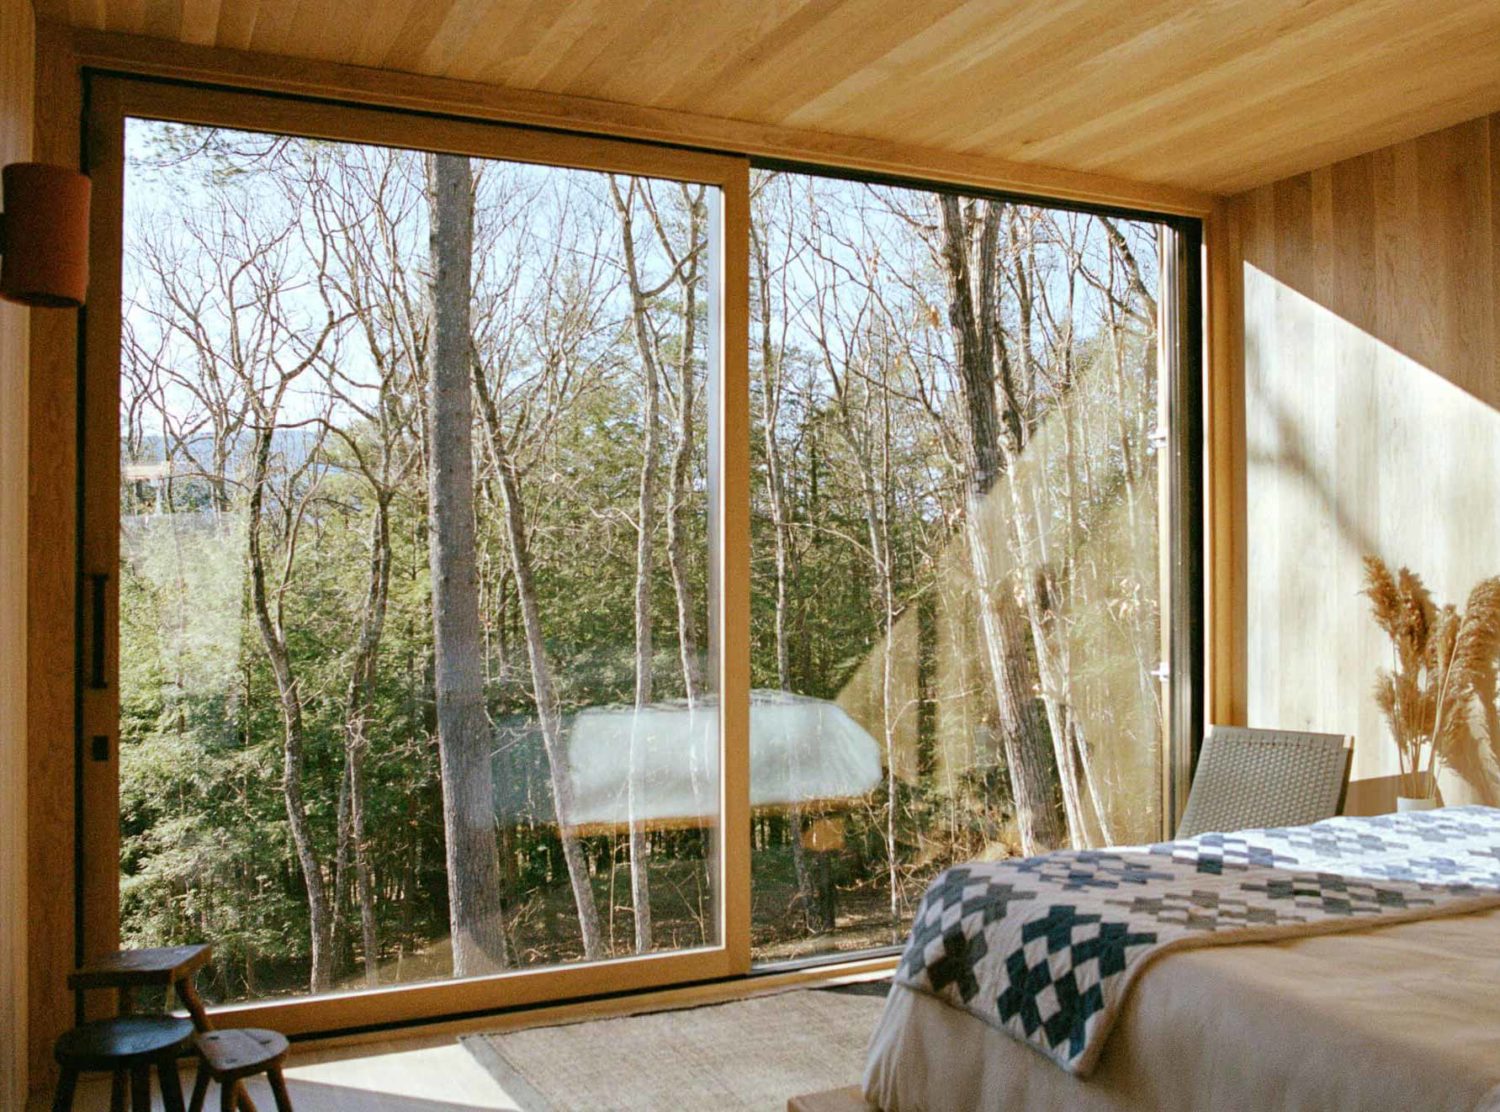 Piaule Every cabin bedroom faces the view and has large sliding windows. Slide and open the big windows and you're completely one with the trees